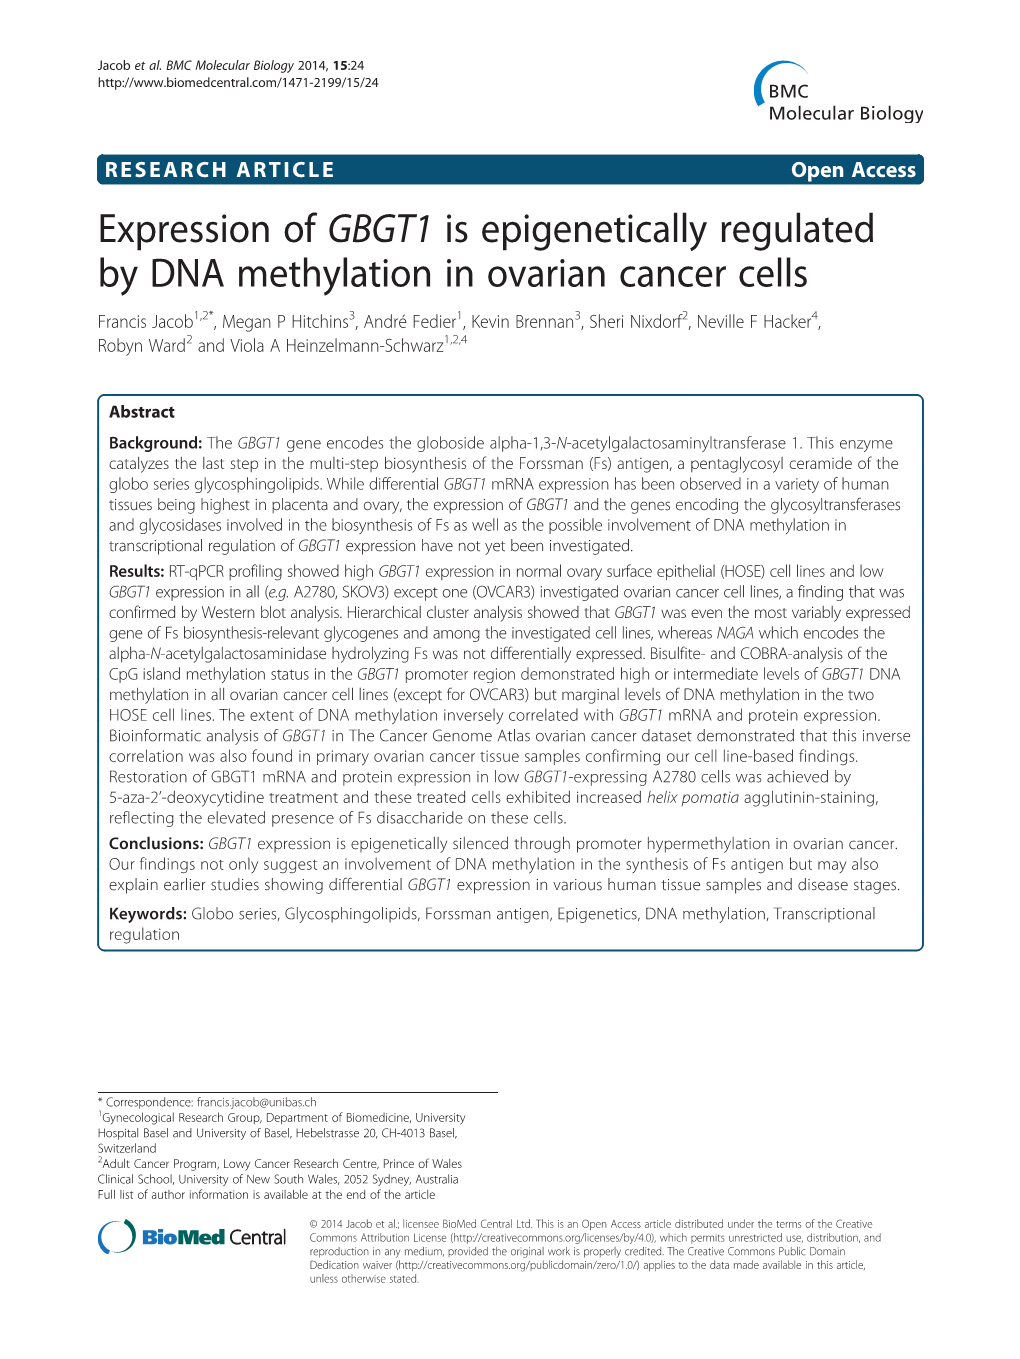 Expression of GBGT1 Is Epigenetically Regulated by DNA Methylation In